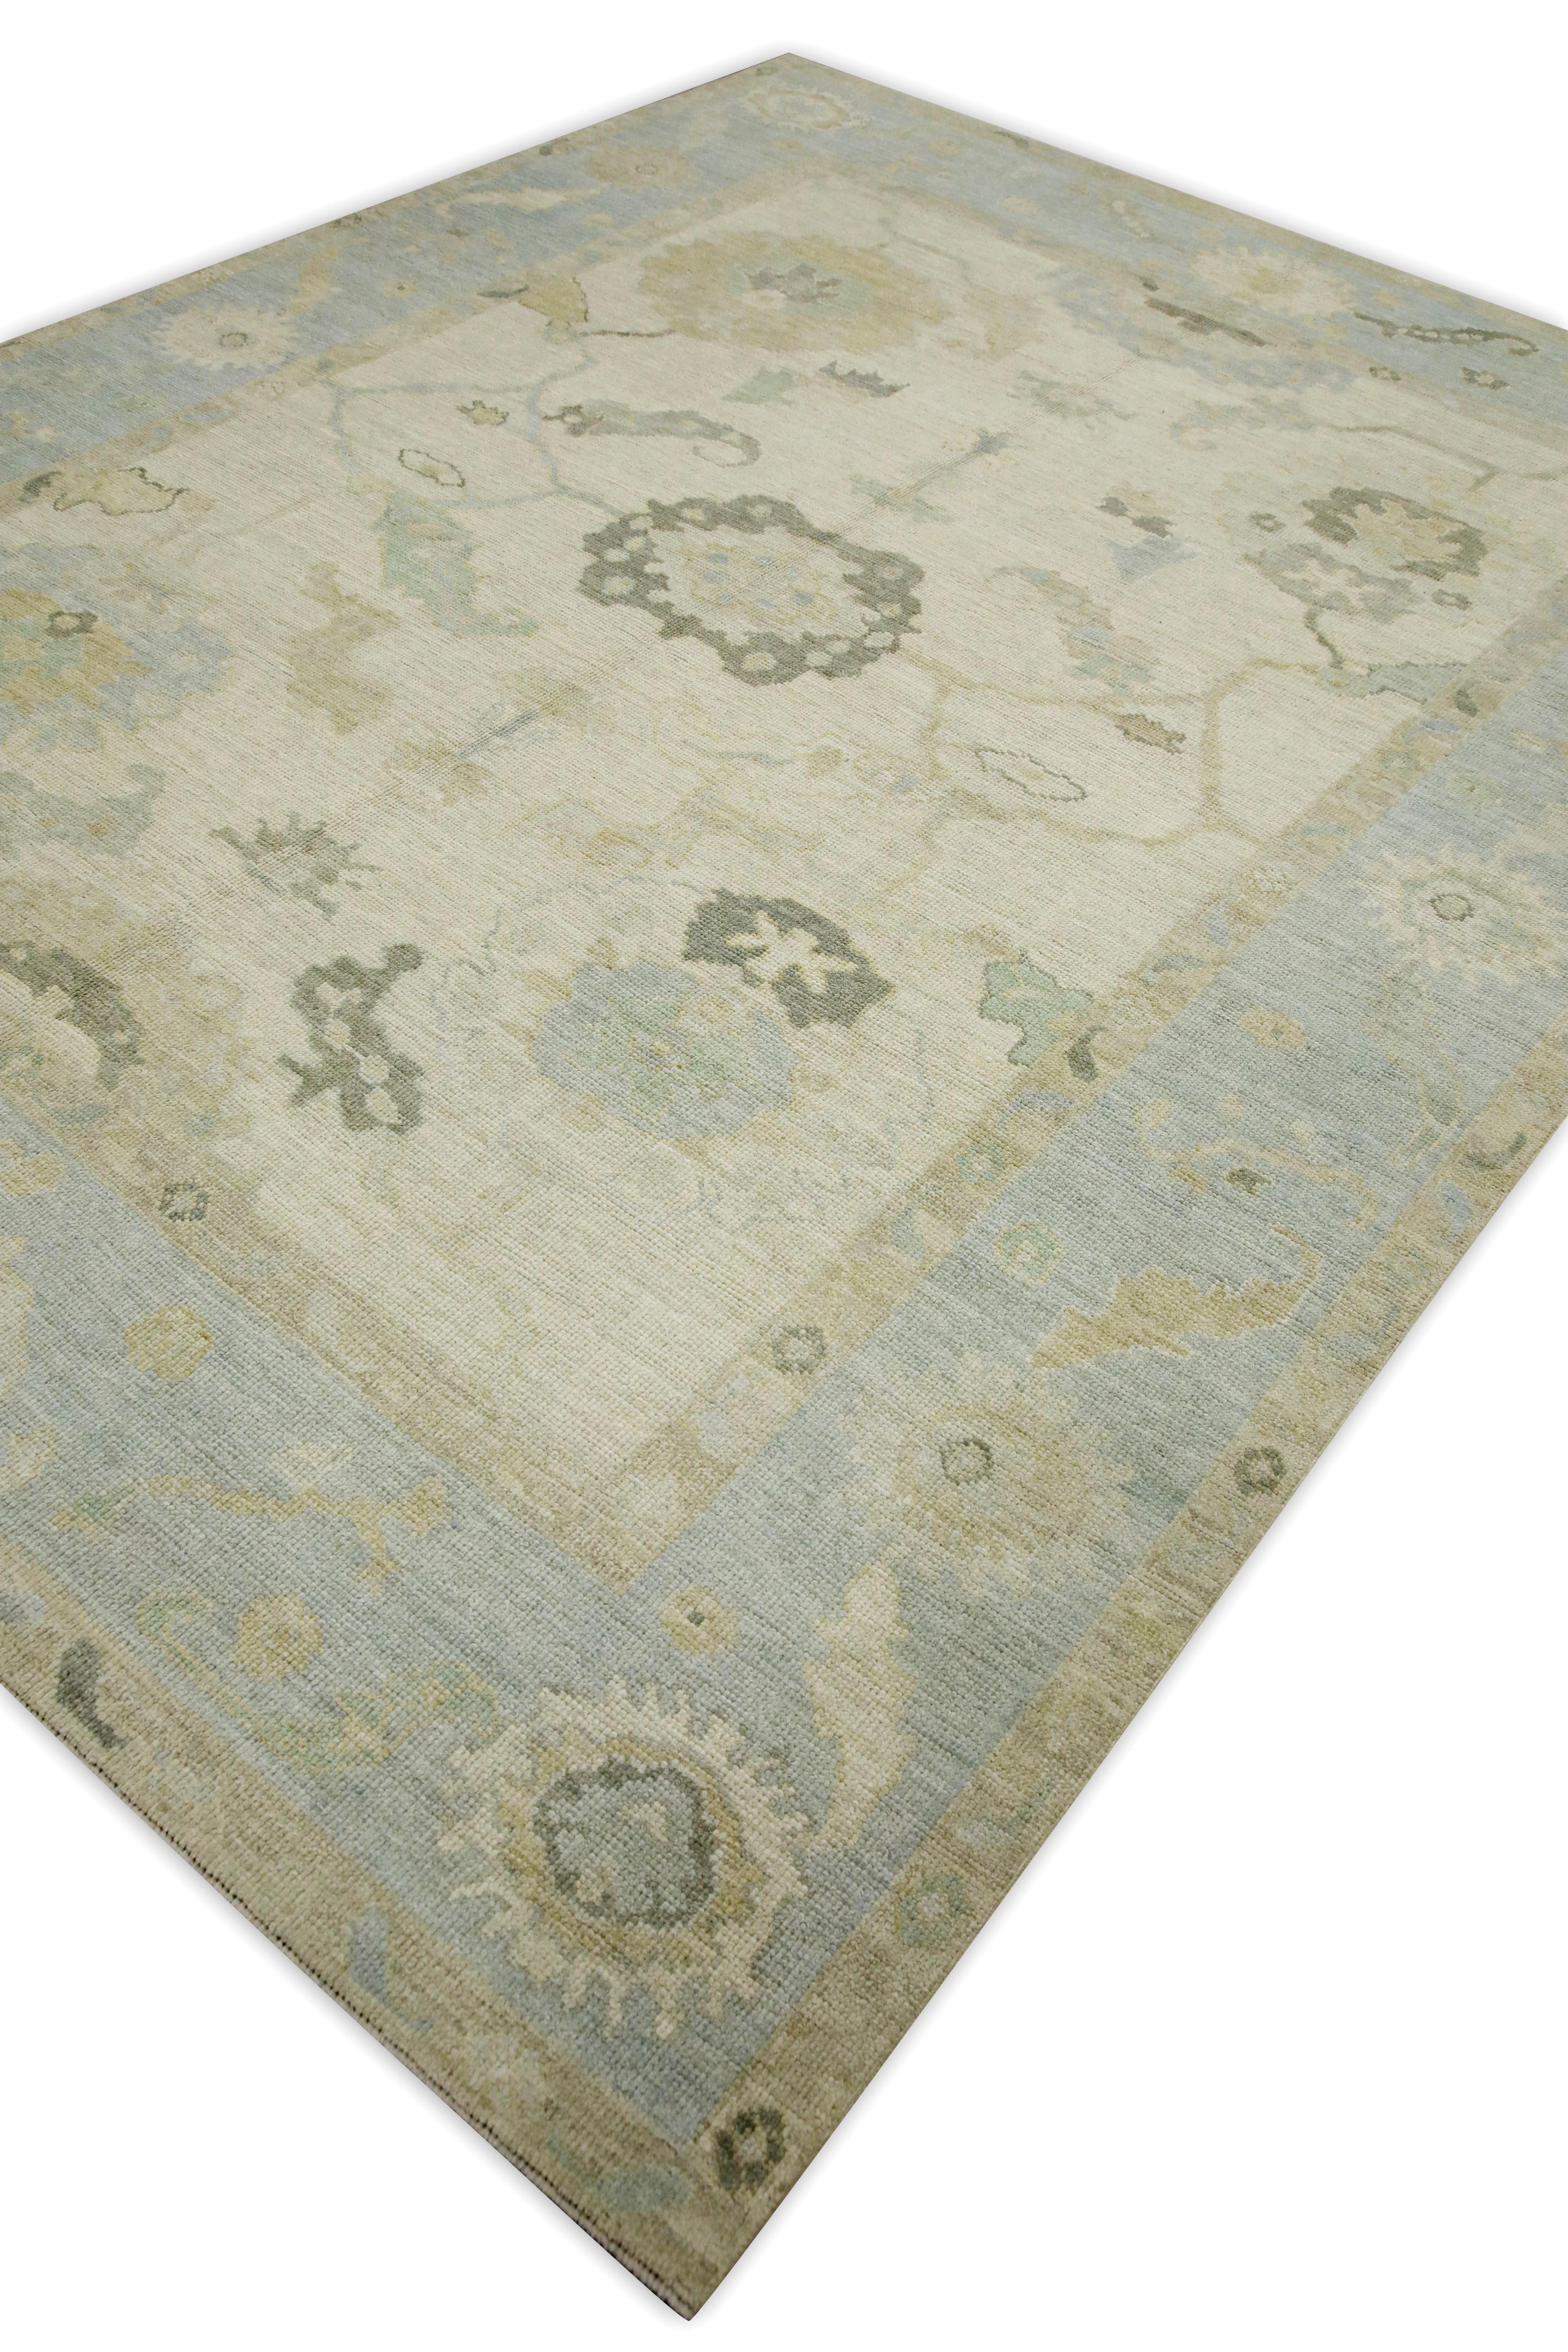 Contemporary Blue Floral Design Handwoven Wool Turkish Oushak Rug 7'11